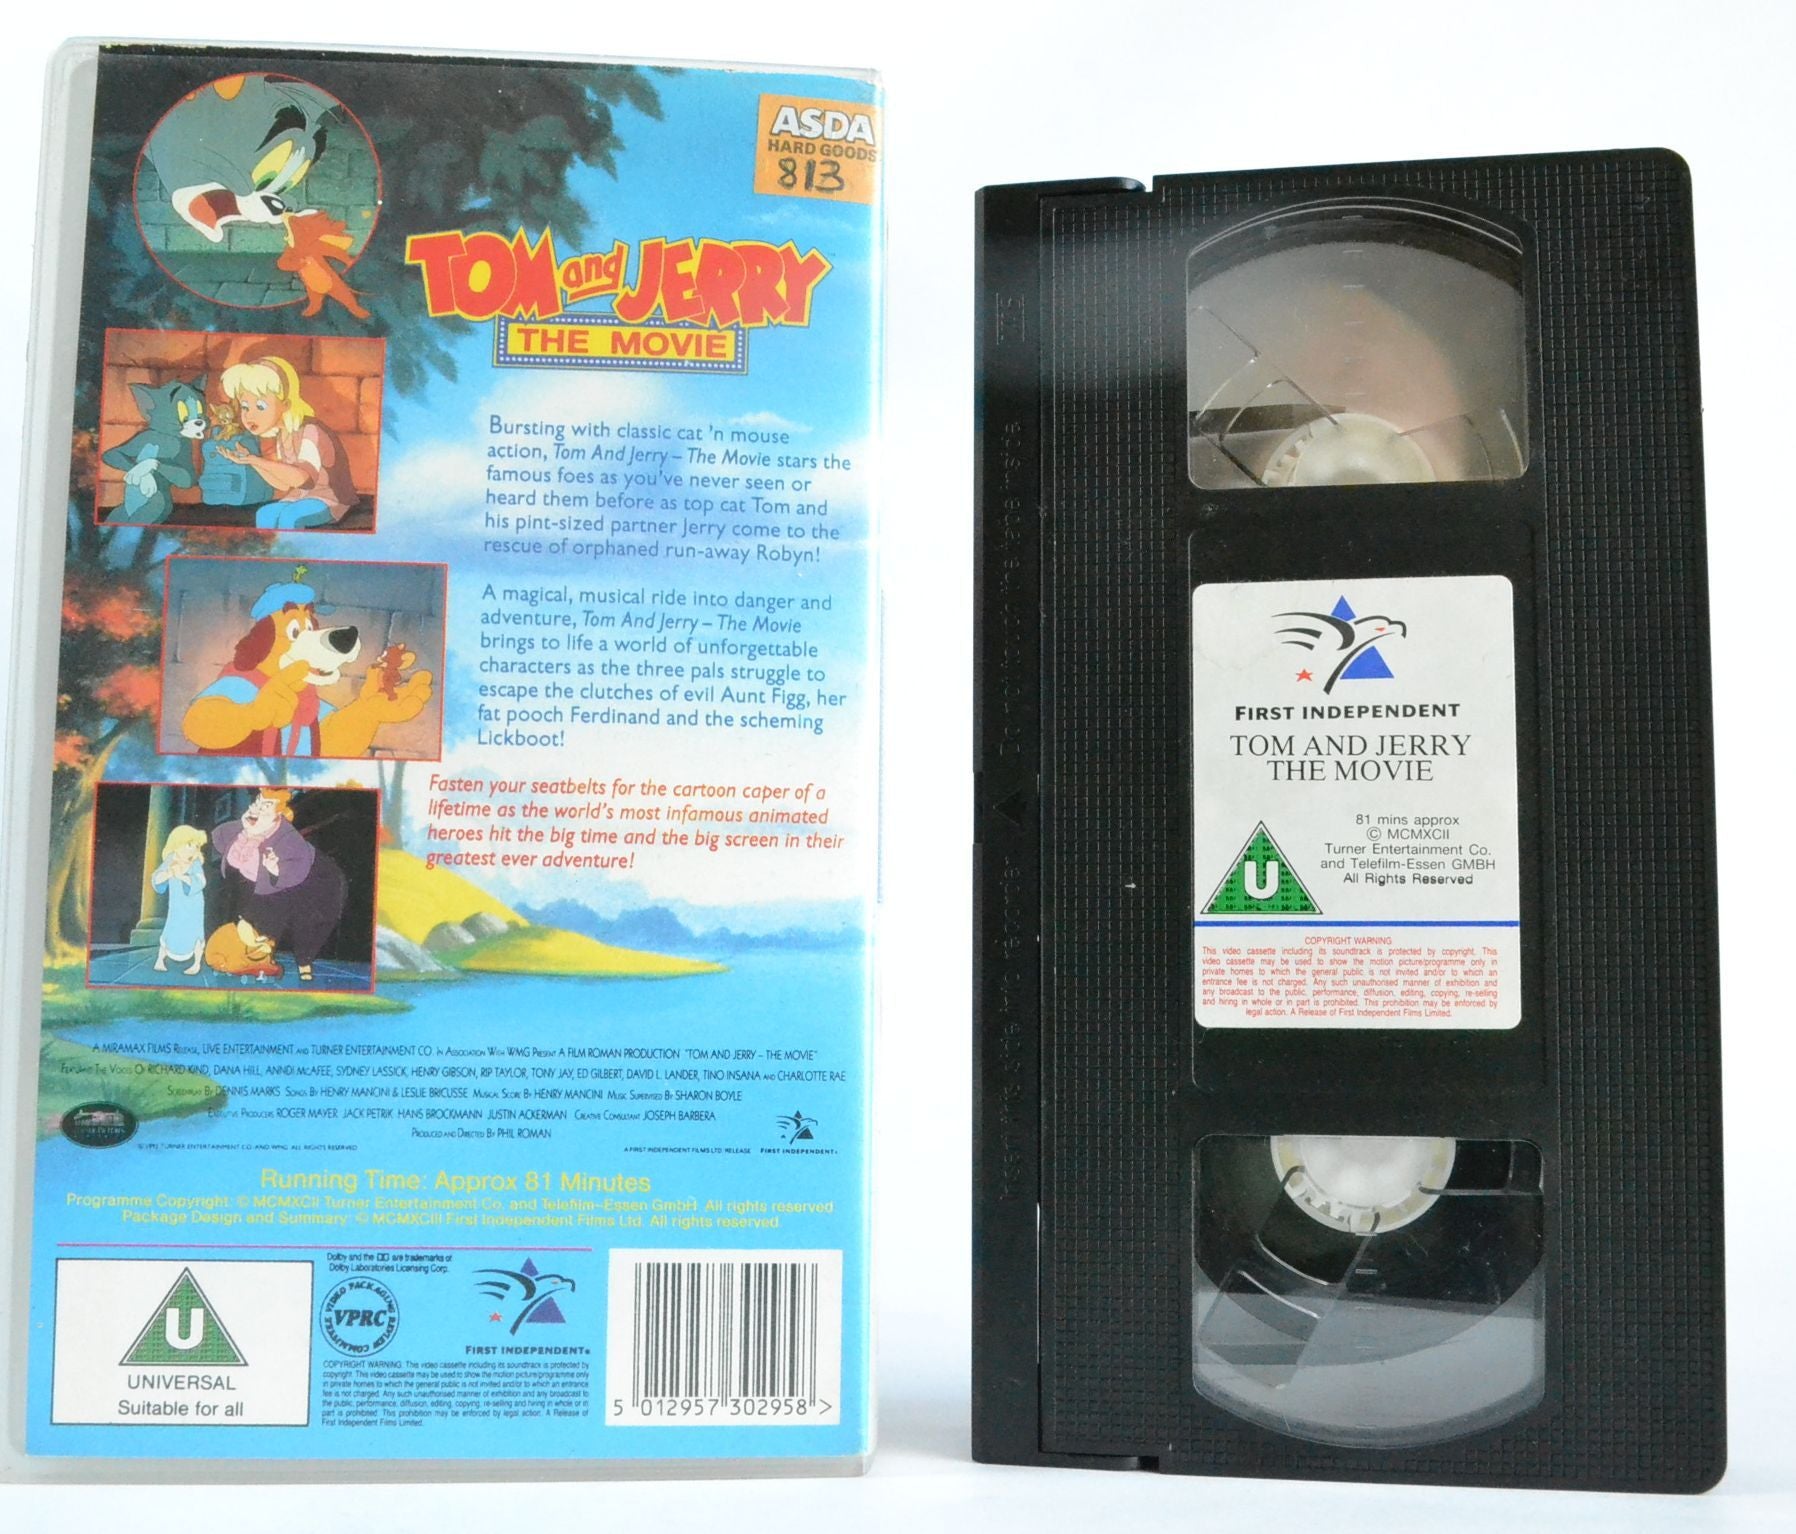 Tom And Jerry [First Motion Picture]: The Movie - Cat’n’Mouse Action Cartoon - VHS-